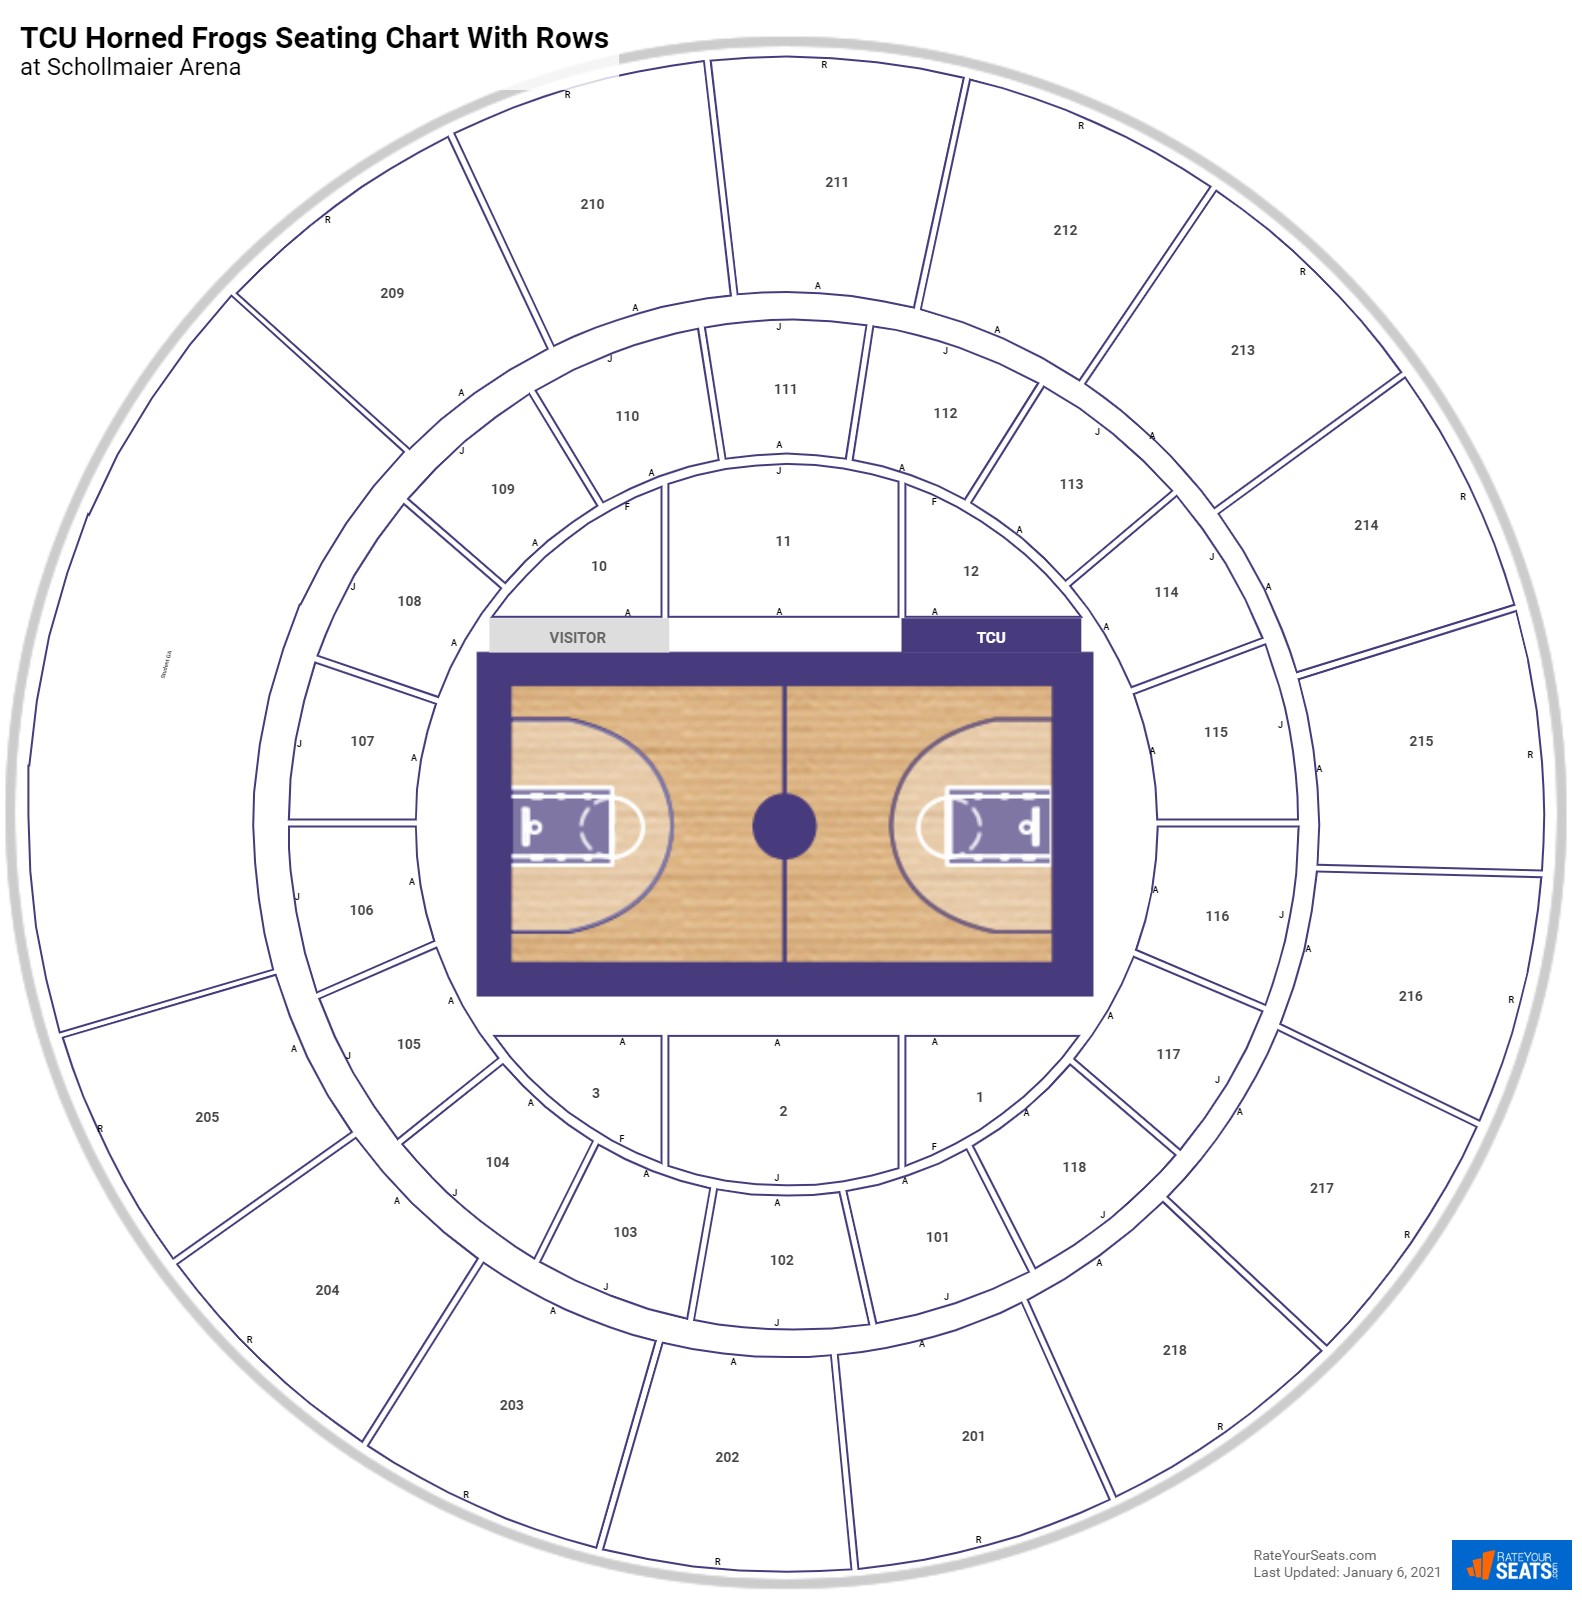 Schollmaier Arena seating chart with row numbers